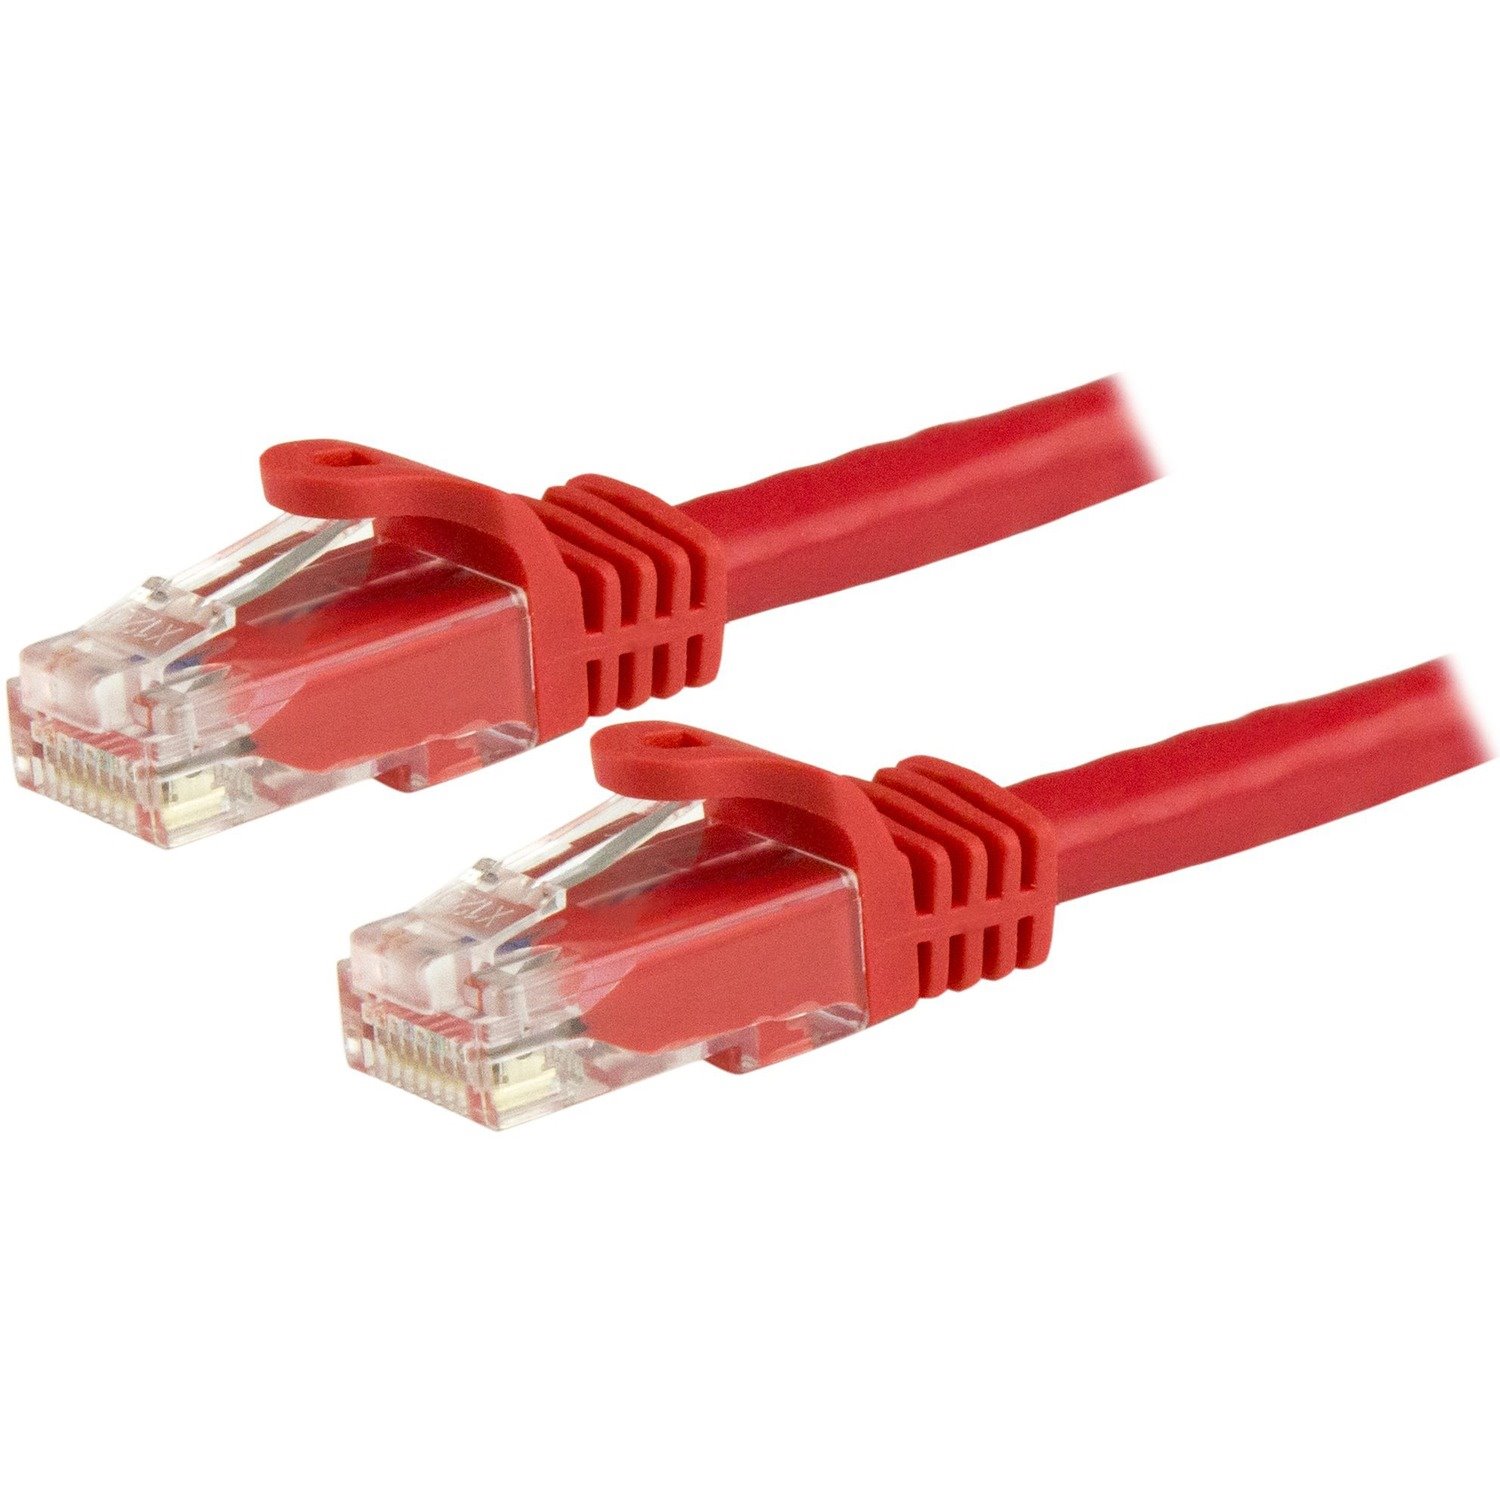 StarTech.com 1.50 m Category 6 Network Cable for Network Device, Hub, Distribution Panel, Workstation, Wall Outlet, IP Phone - 1